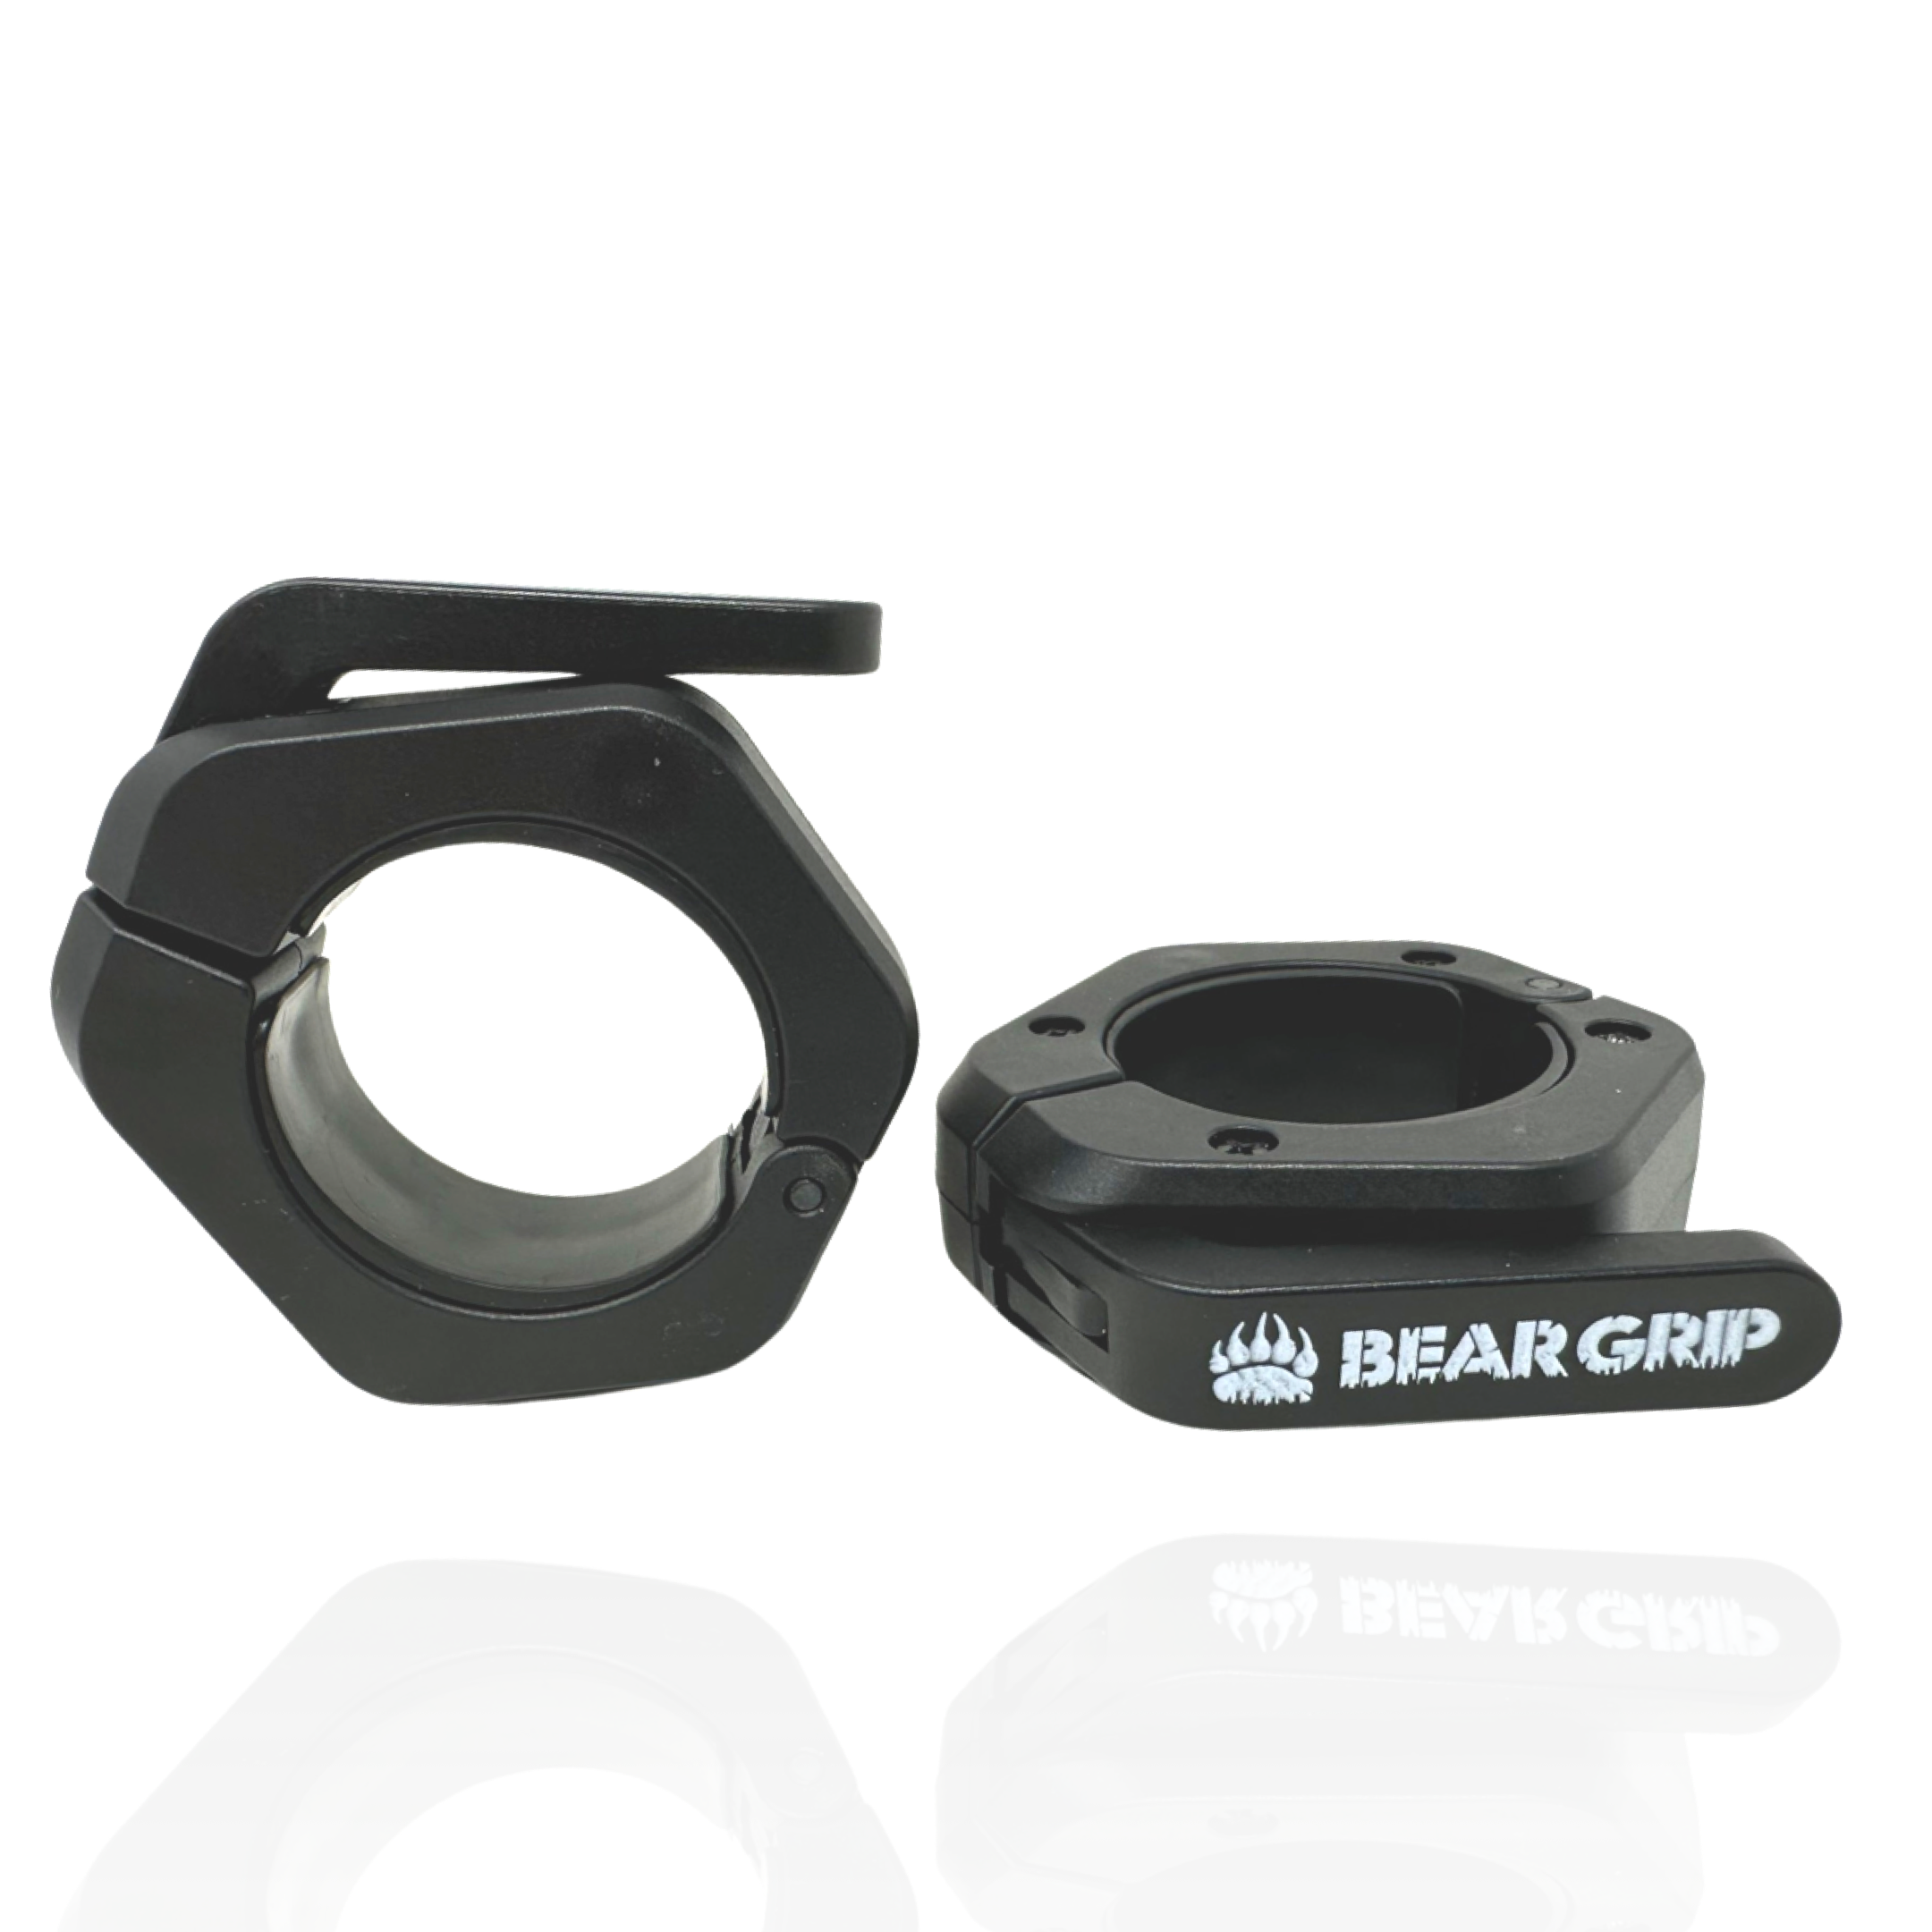 BEAR GRIP - Olympic Barbell Clamps Collars Clip (Pair) for Weight Lifting